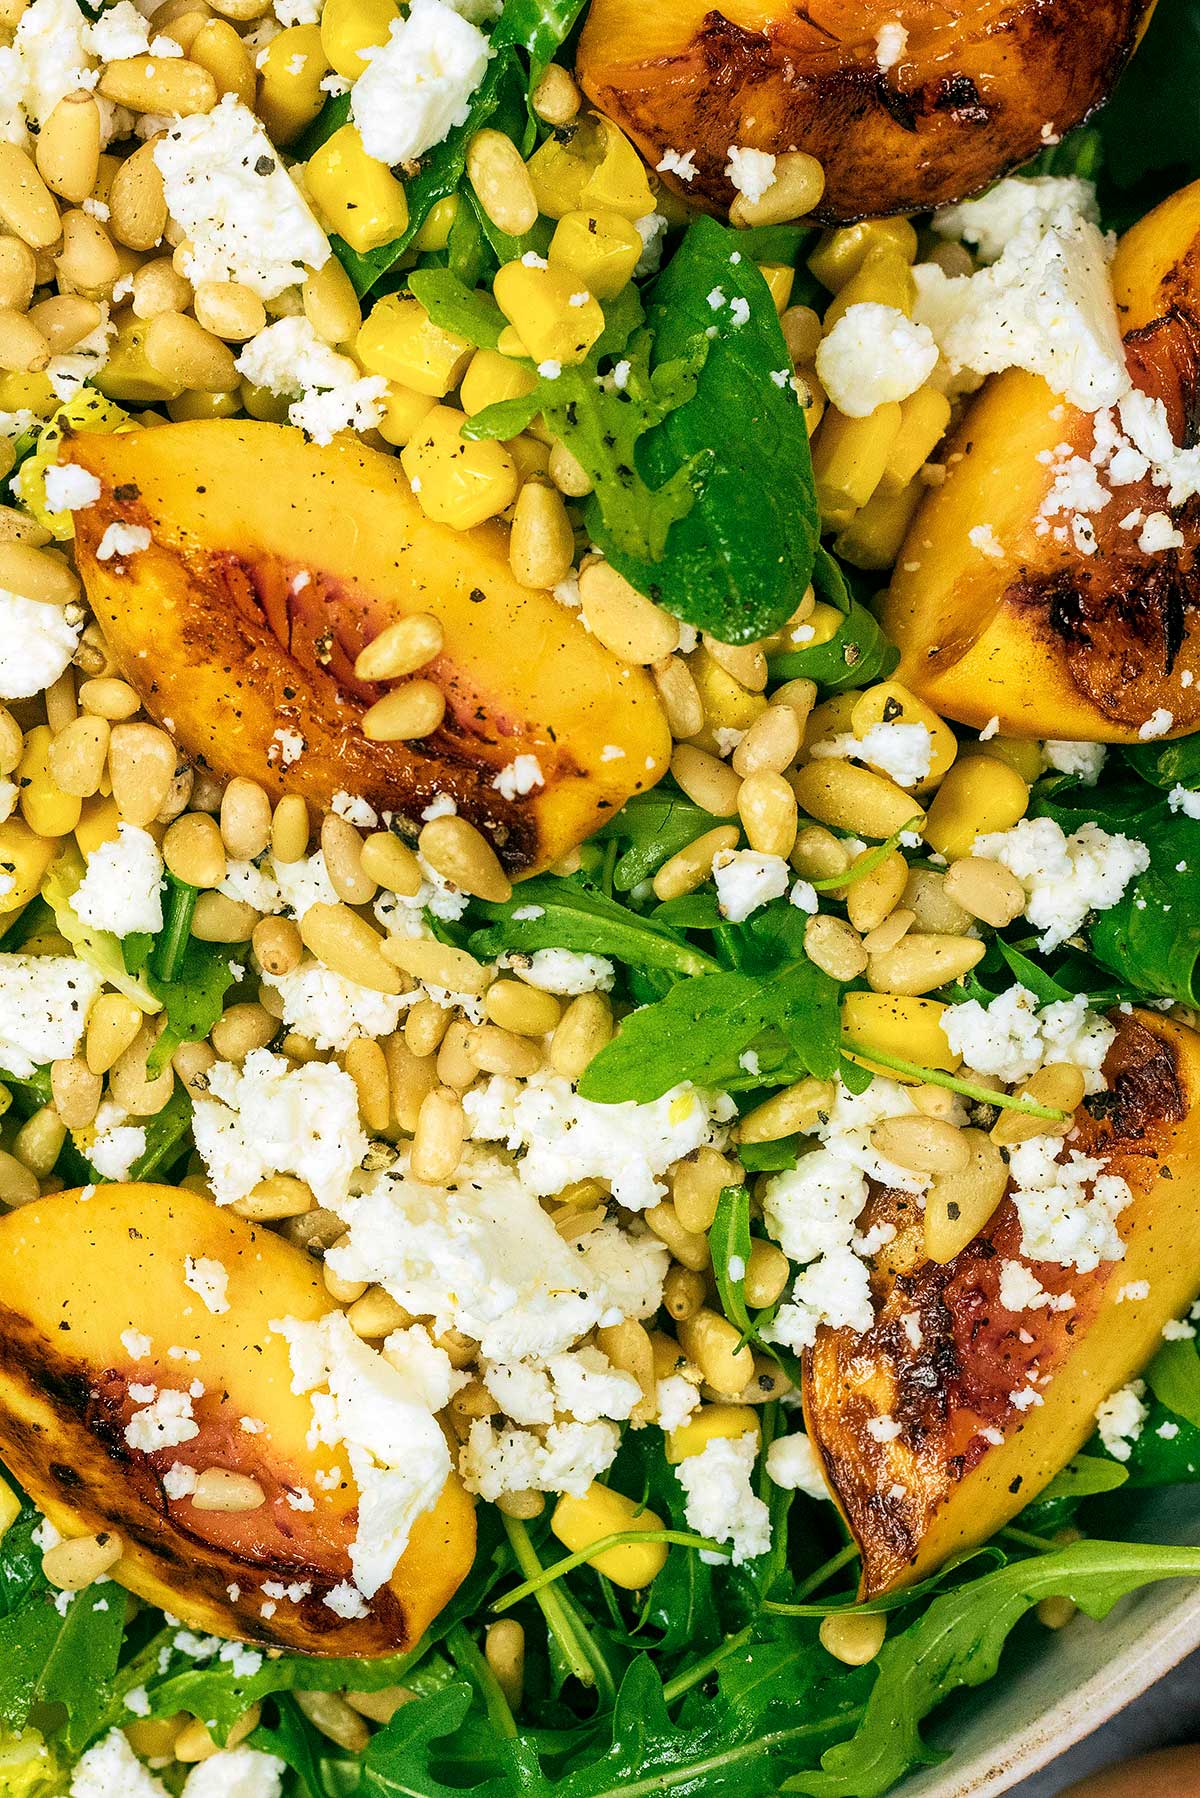 Sliced, grilled peaches, pine nuts and crumbled feta cheese on top of dressed salad leaves.